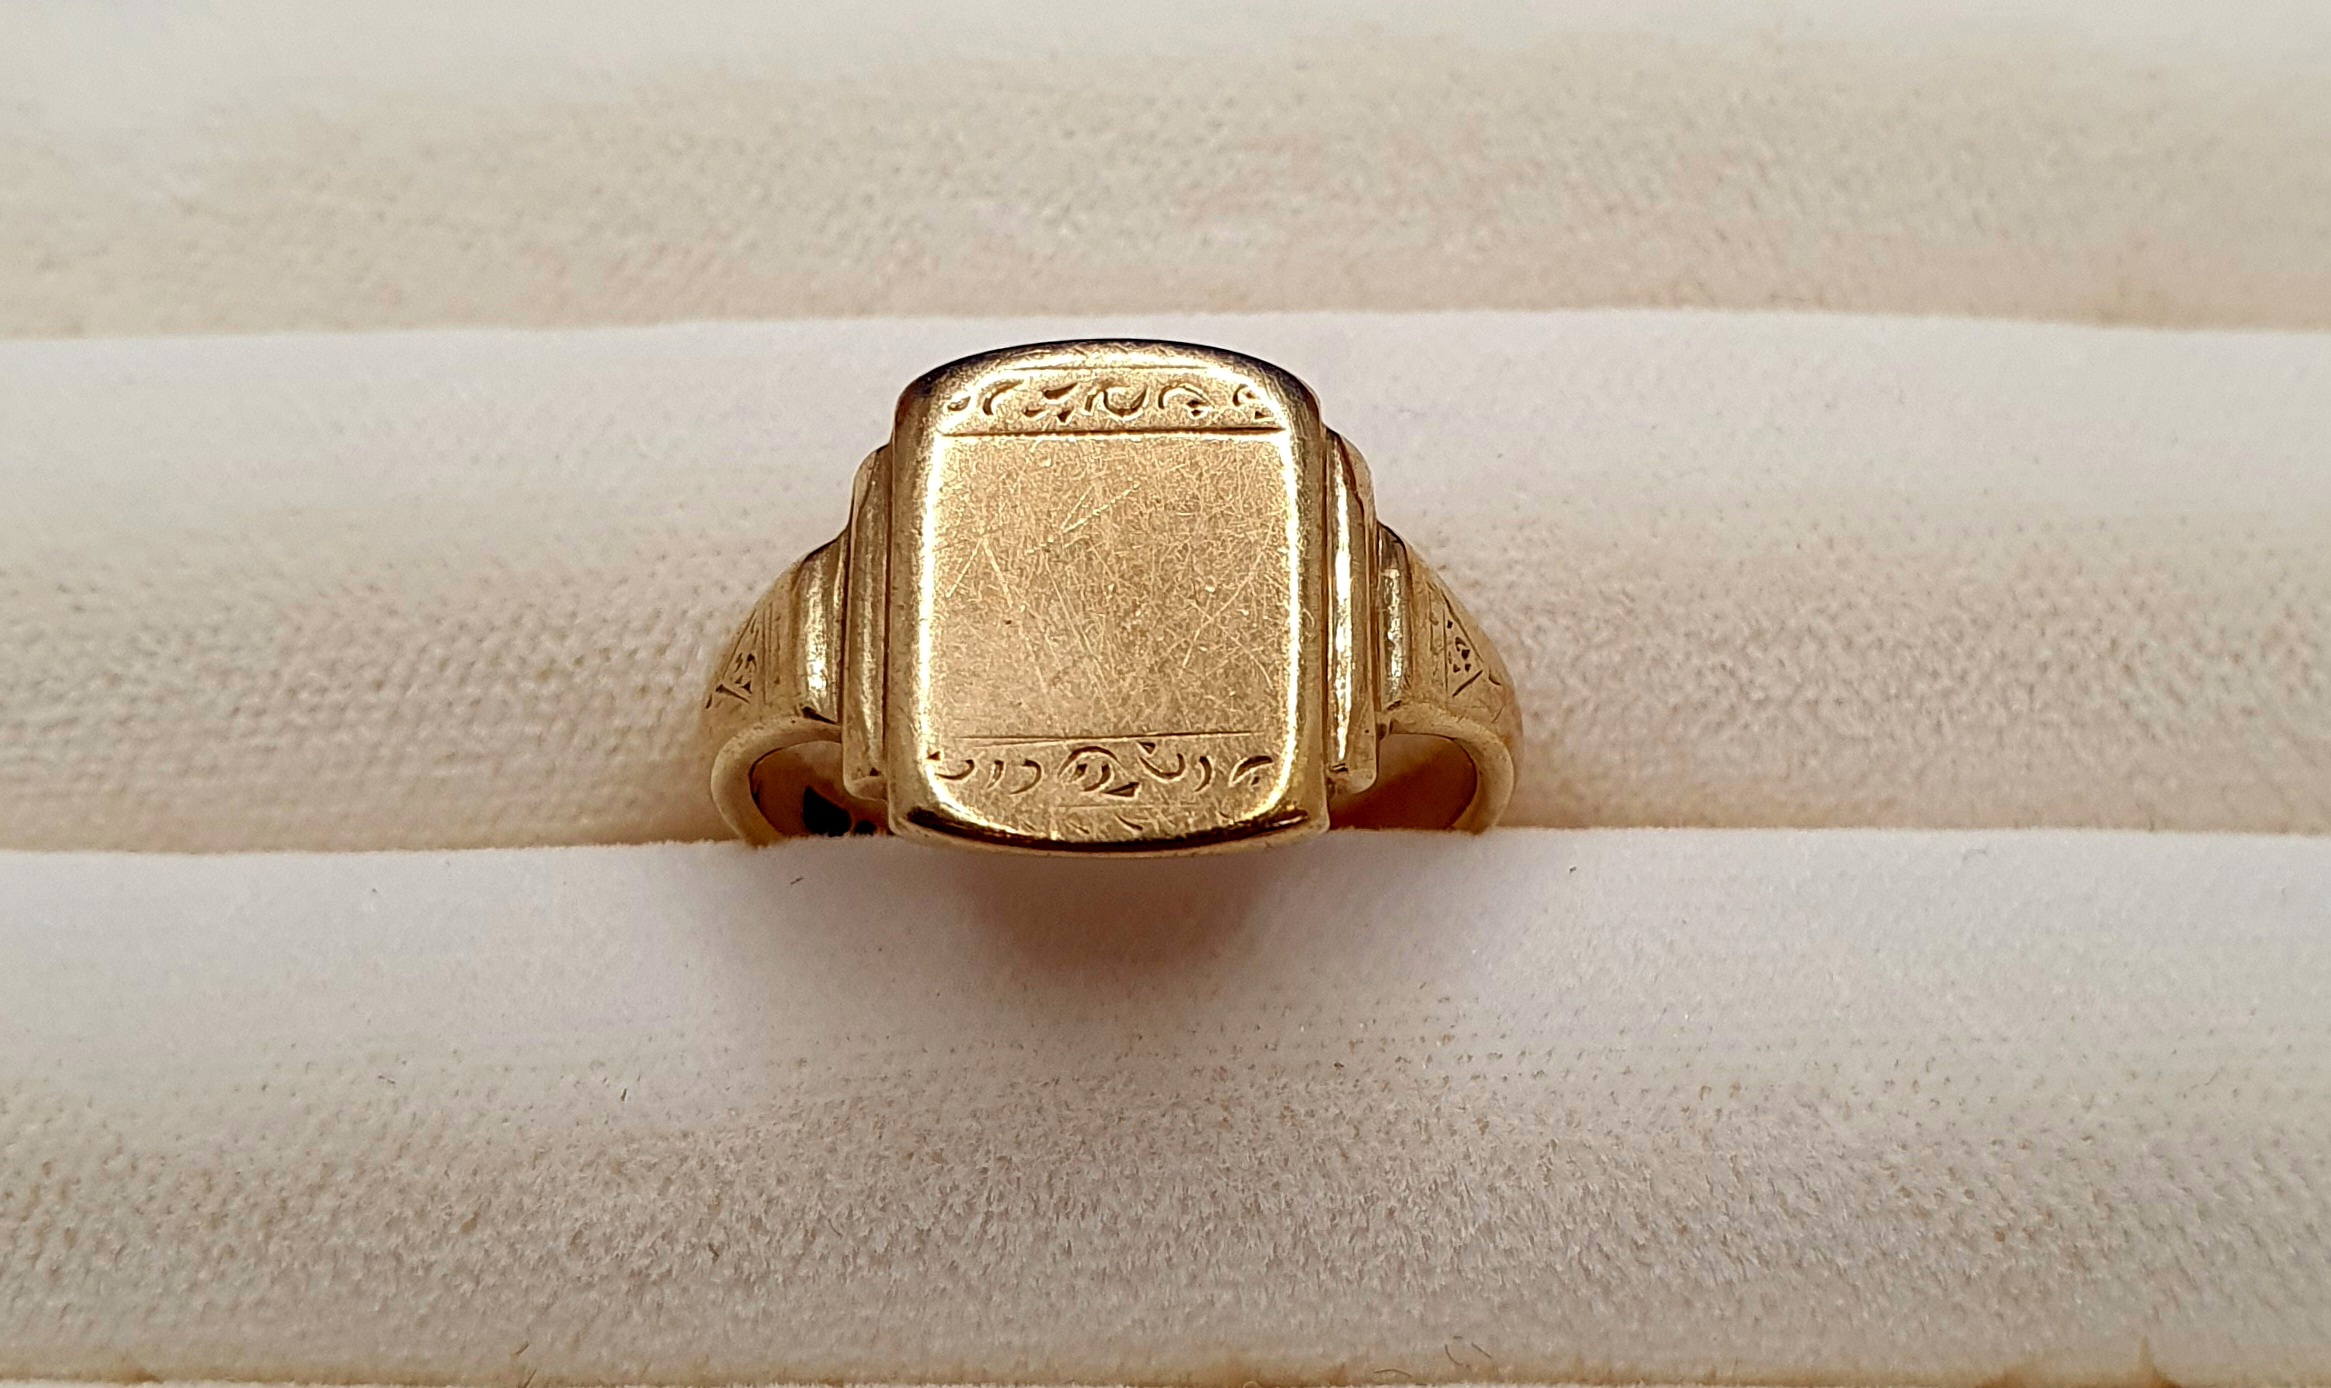 9ct Gold Gents Signet Ring, weight 3.77g, size N